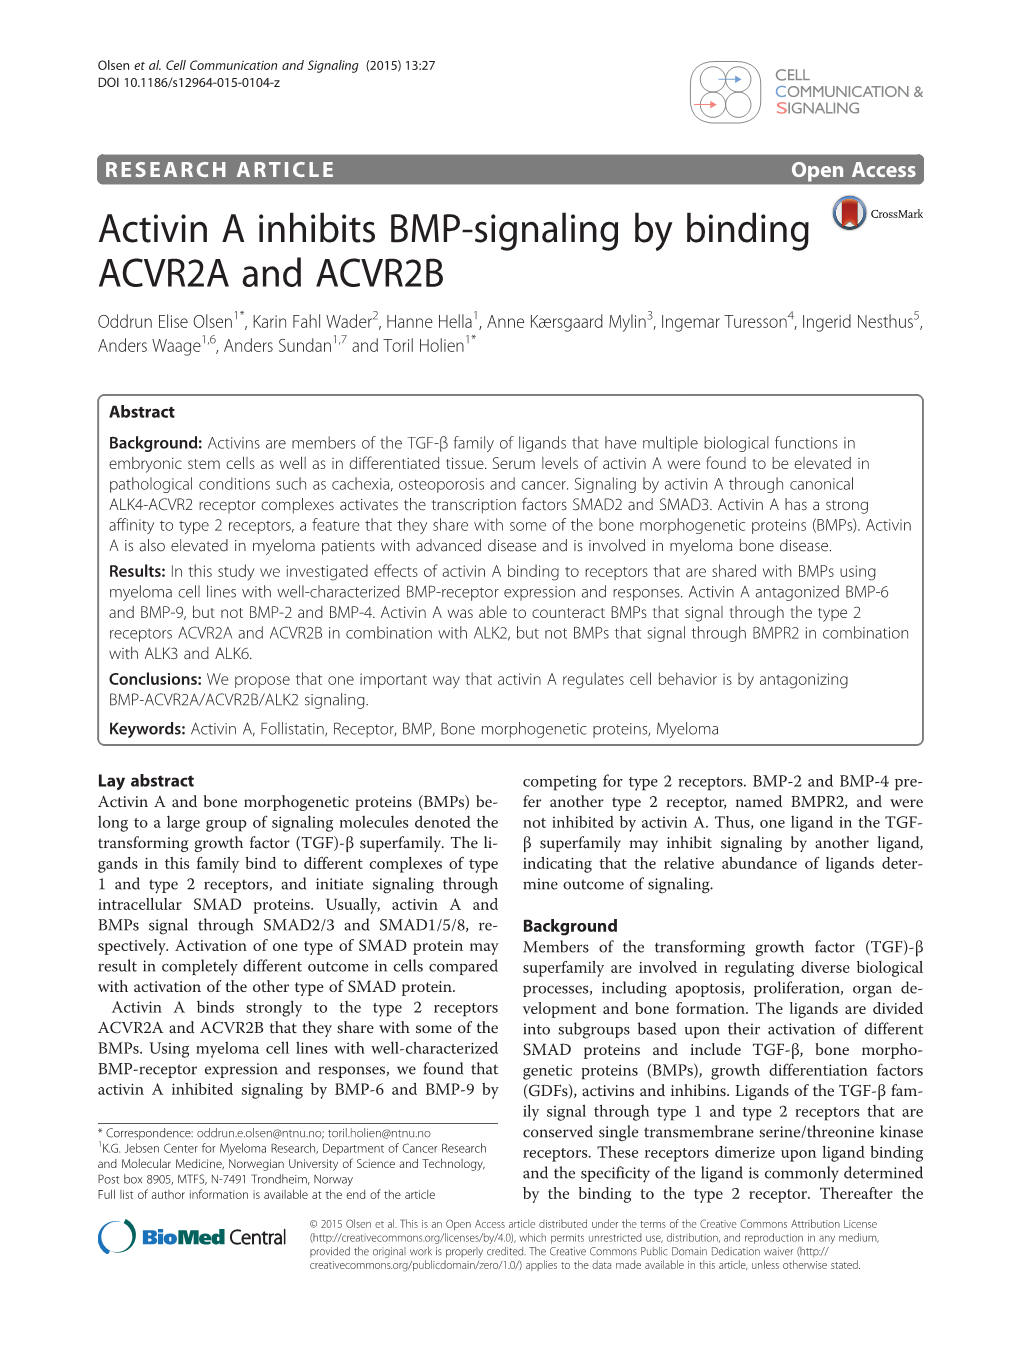 Activin a Inhibits BMP-Signaling by Binding ACVR2A and ACVR2B